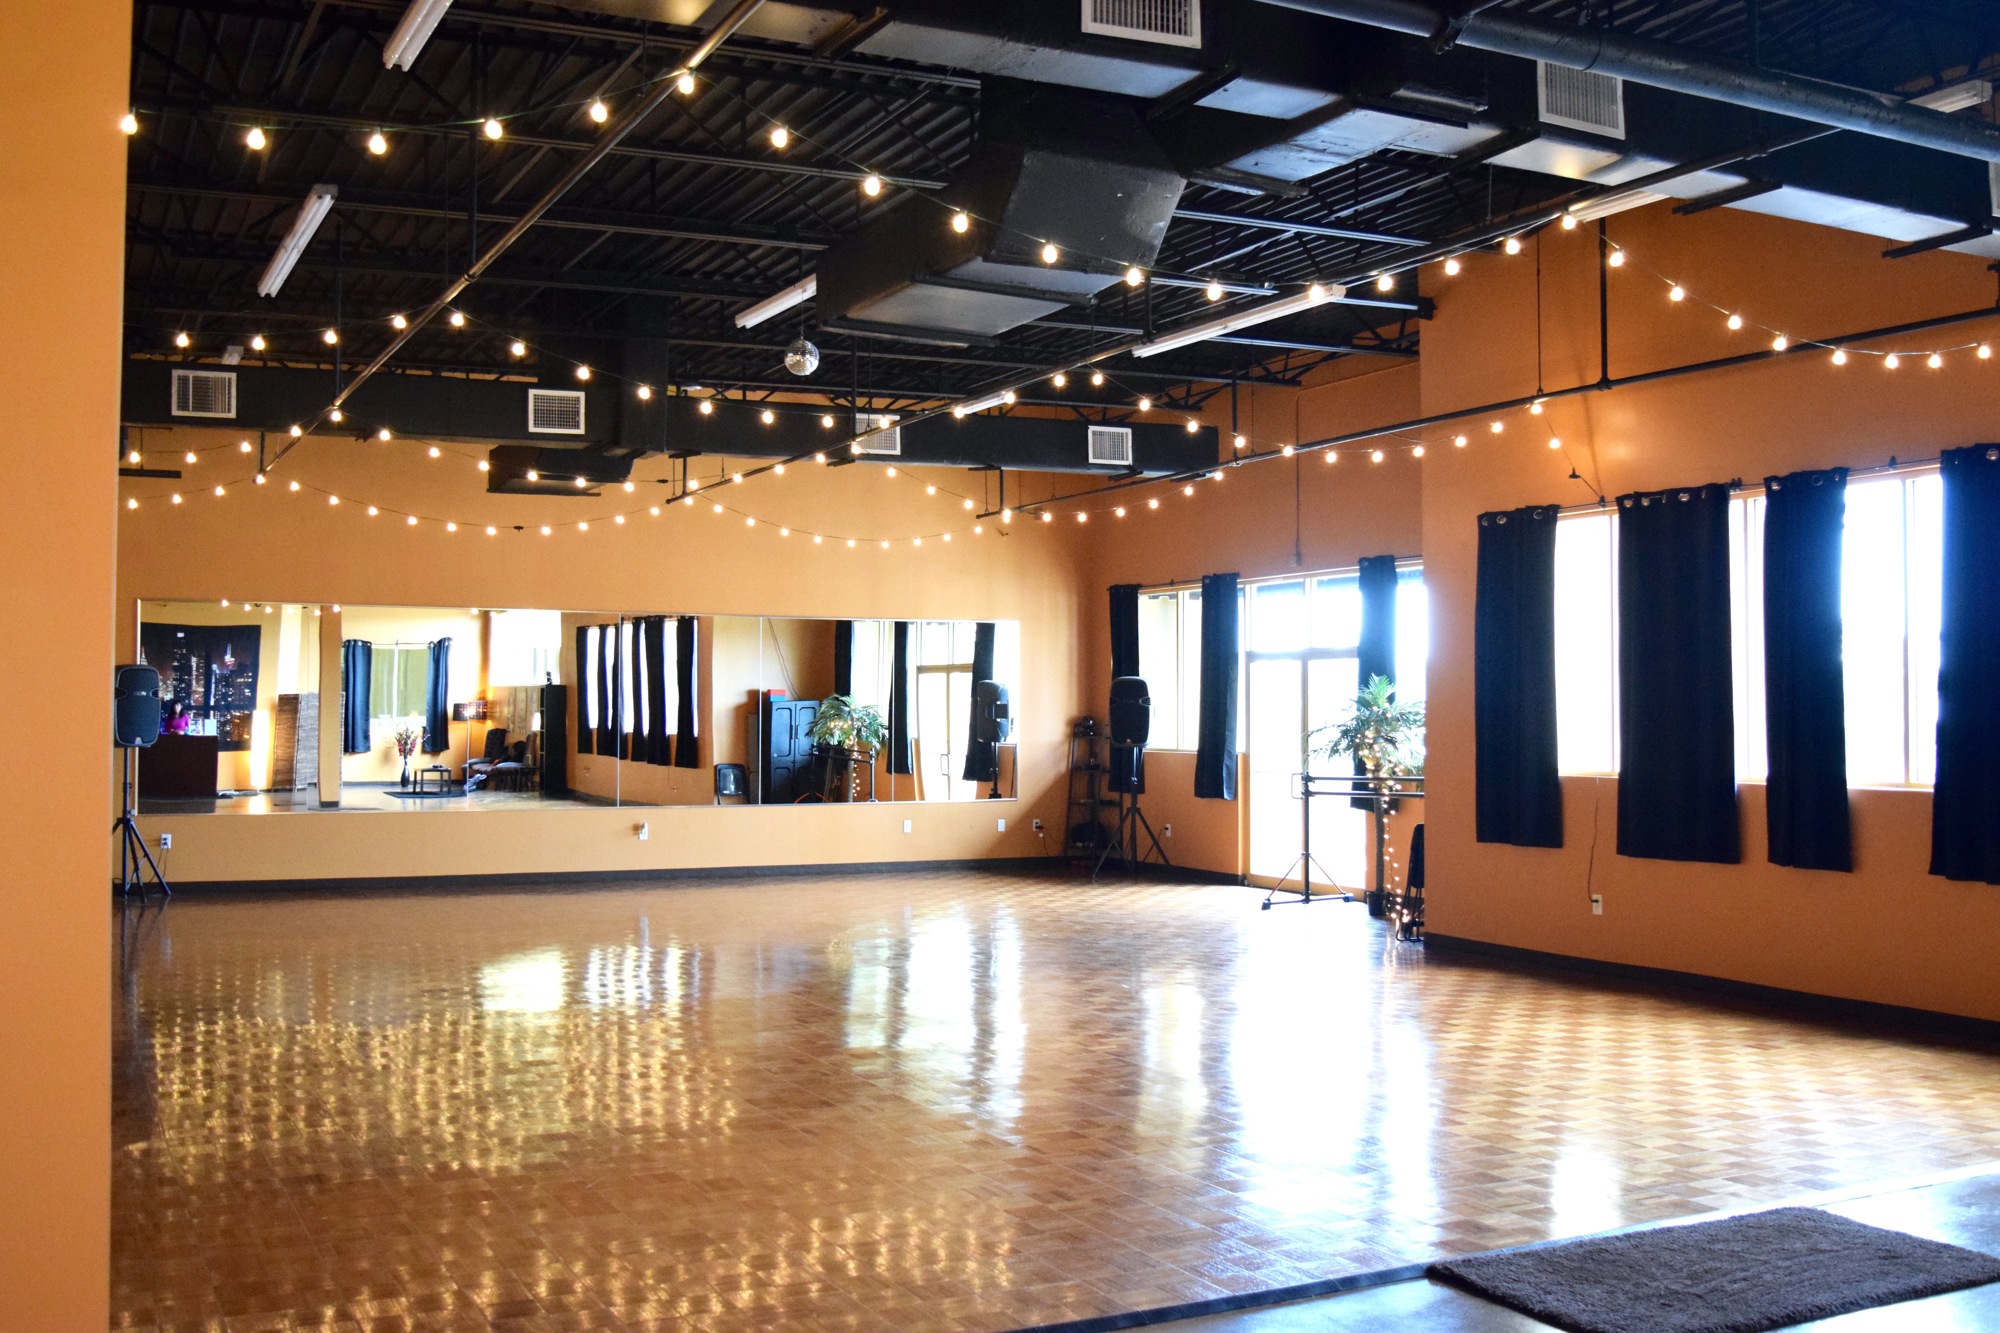 Studio K offers a wide-open fitness area with warm lighting and decorative fairy lights for a relaxed, inviting atmosphere.